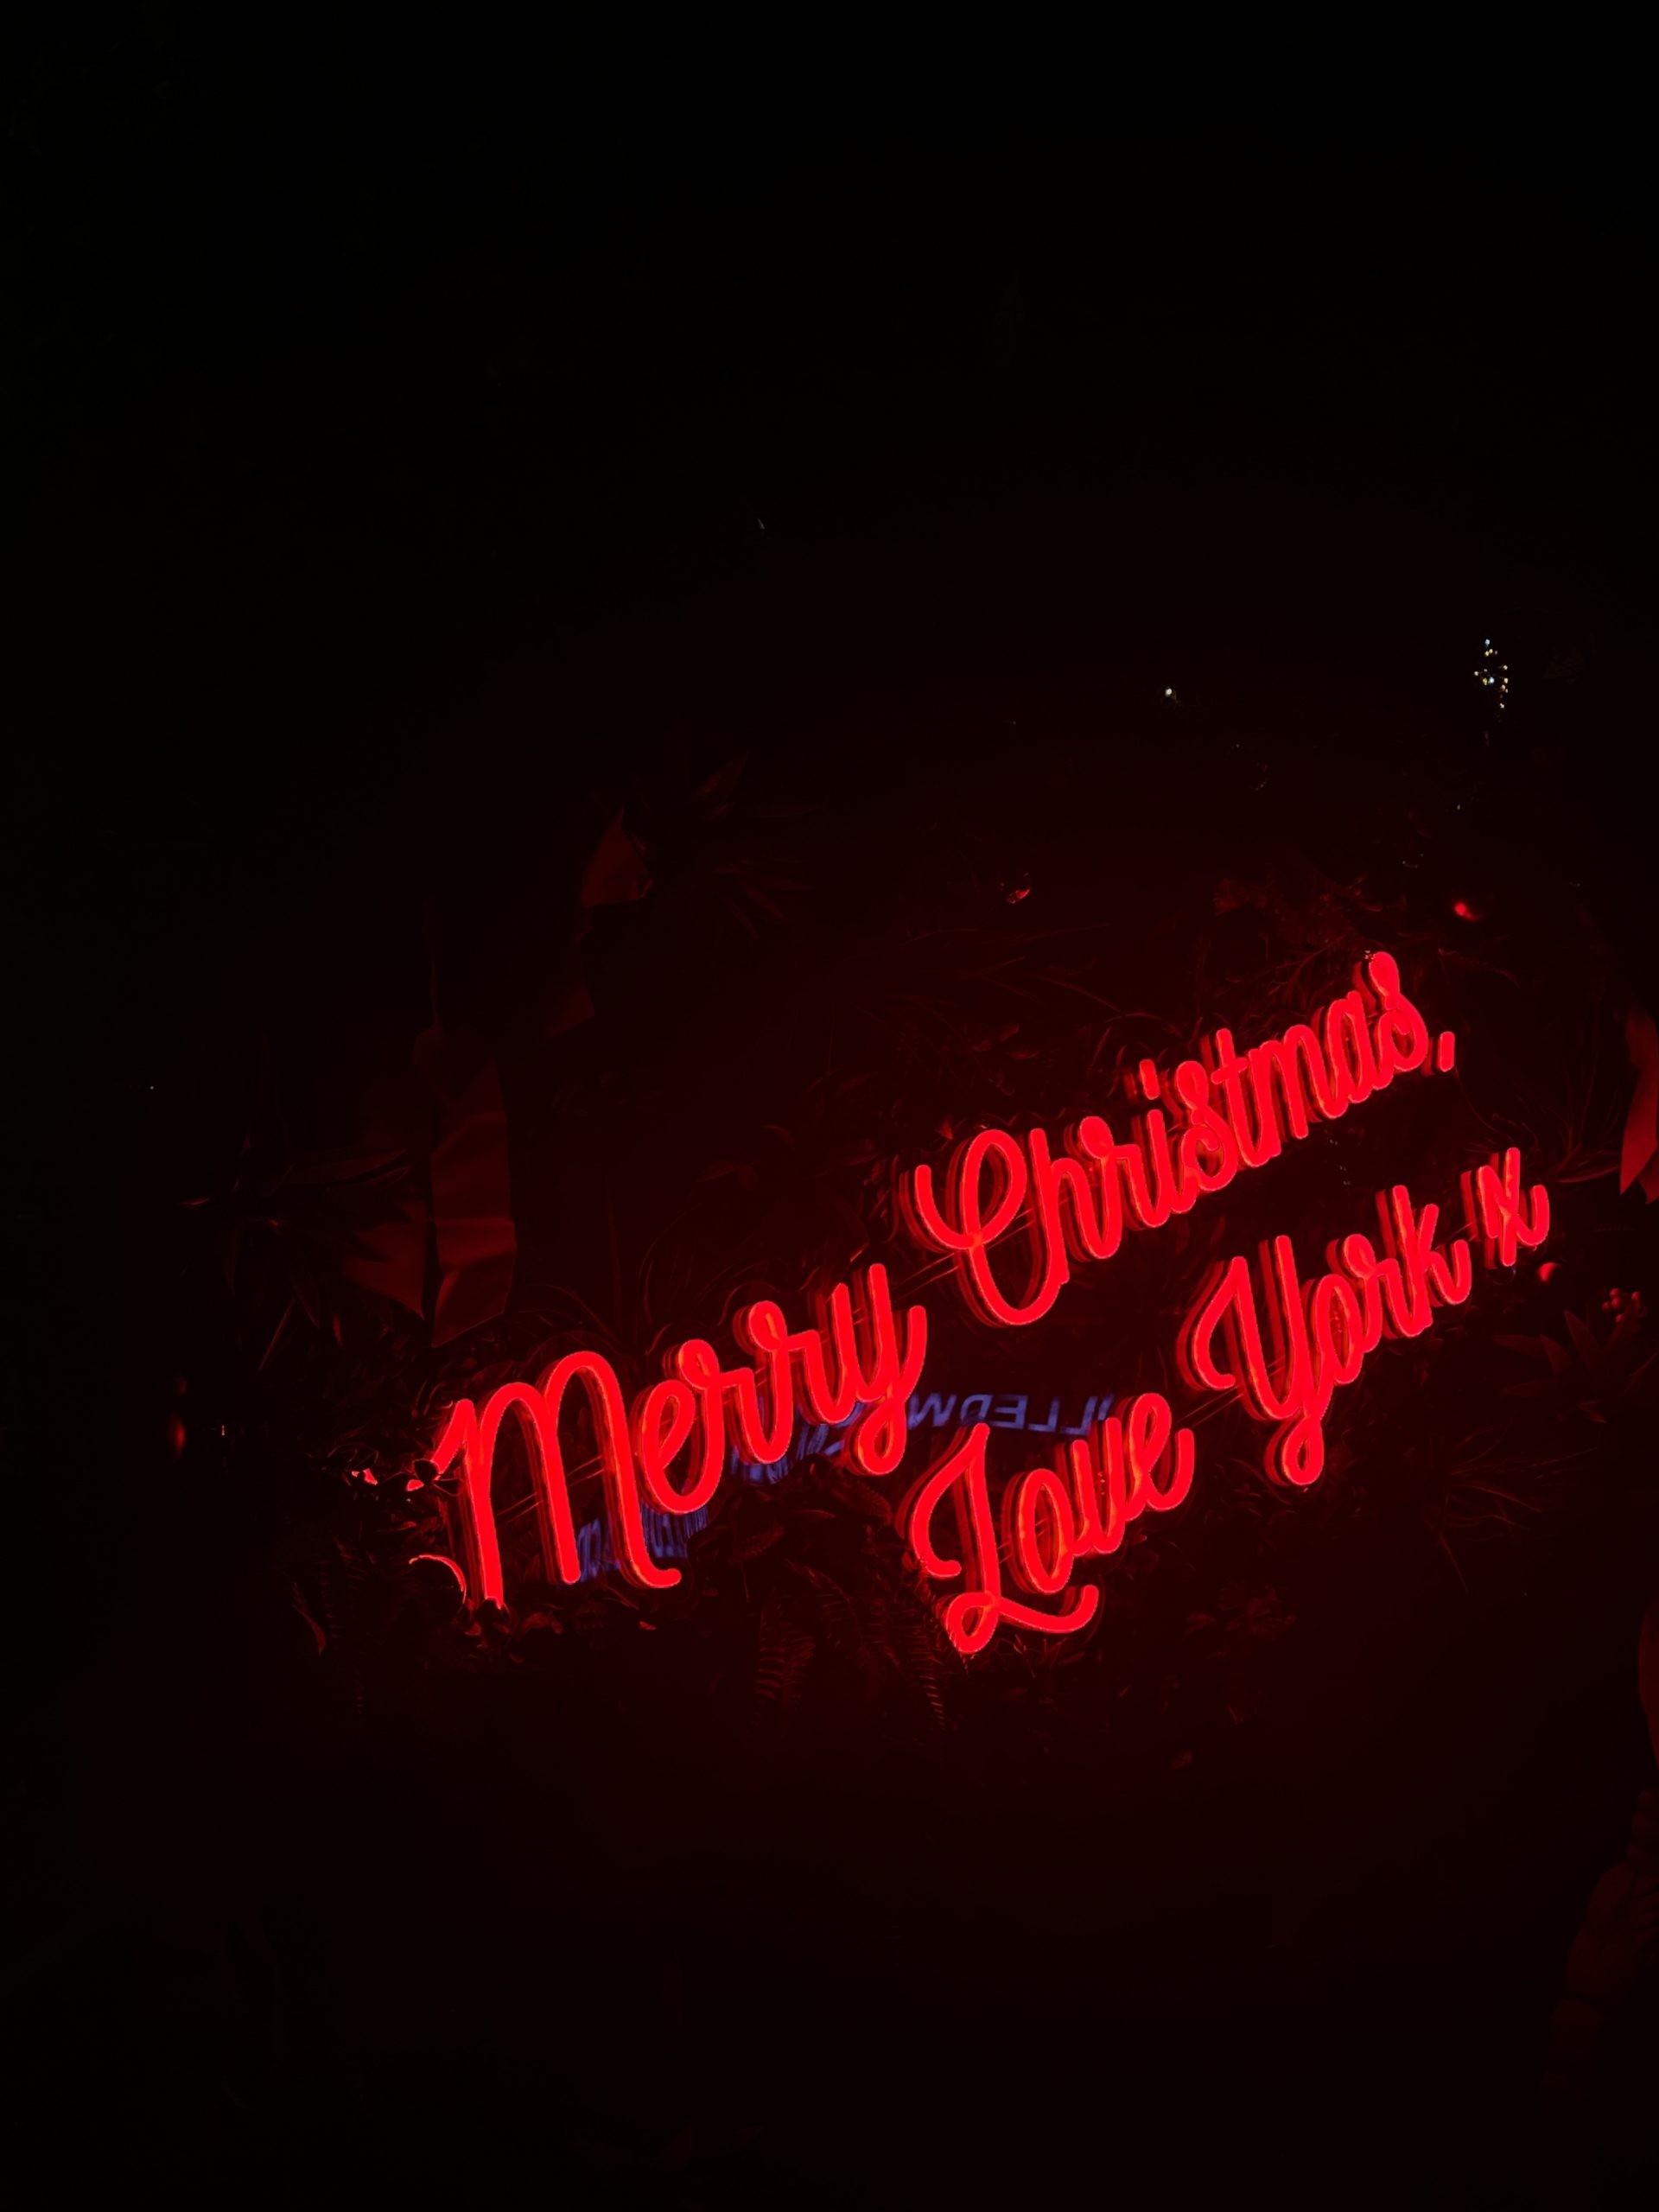 Christmas Lights, York, England. Neon sign in red with the text reading:
"Merry Christmas,
Love York x"